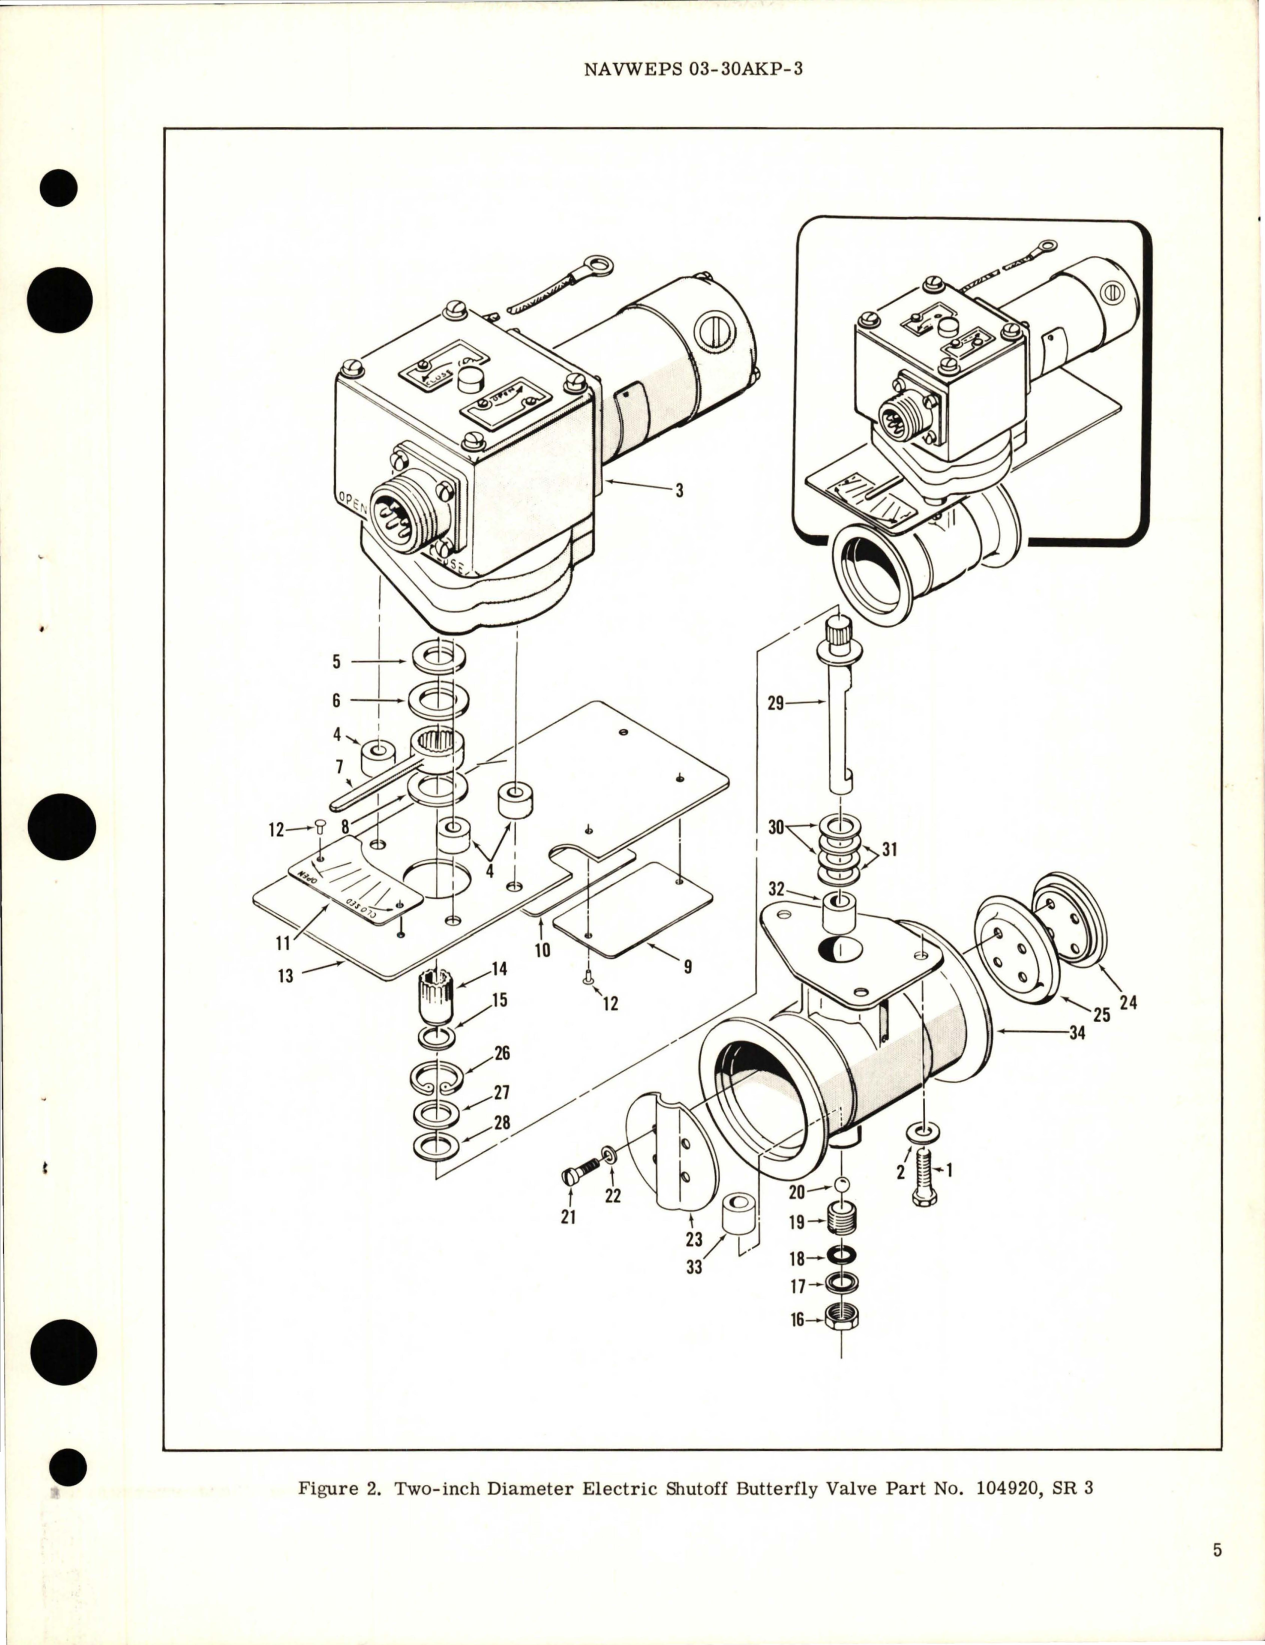 Sample page 5 from AirCorps Library document: Overhaul Instructions with Parts Breakdown for Electric Shutoff Butterfly Valve - 2 inch Diameter - Part 104920, SR 3